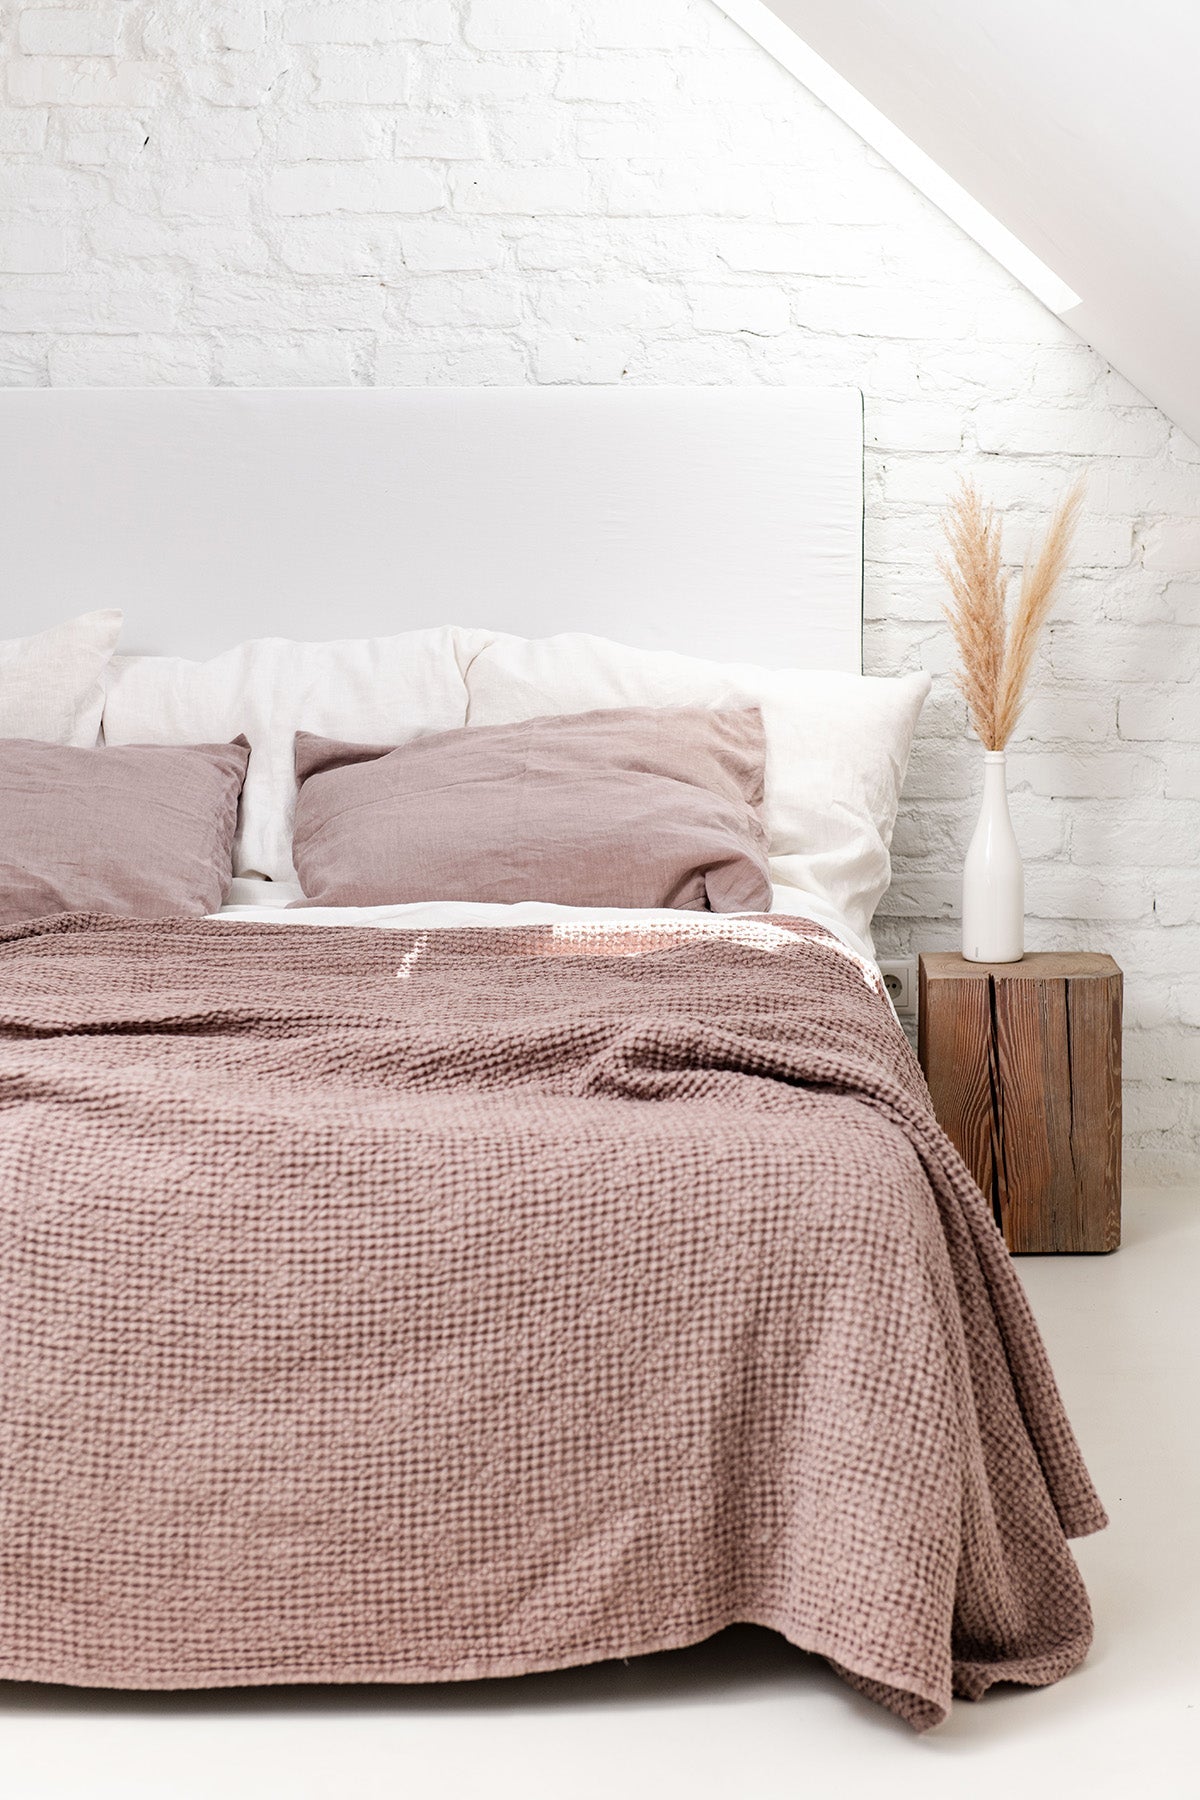 Corner Shot of Bed with Linen Waffle Blanket in Rosy Brown By AmourlInen